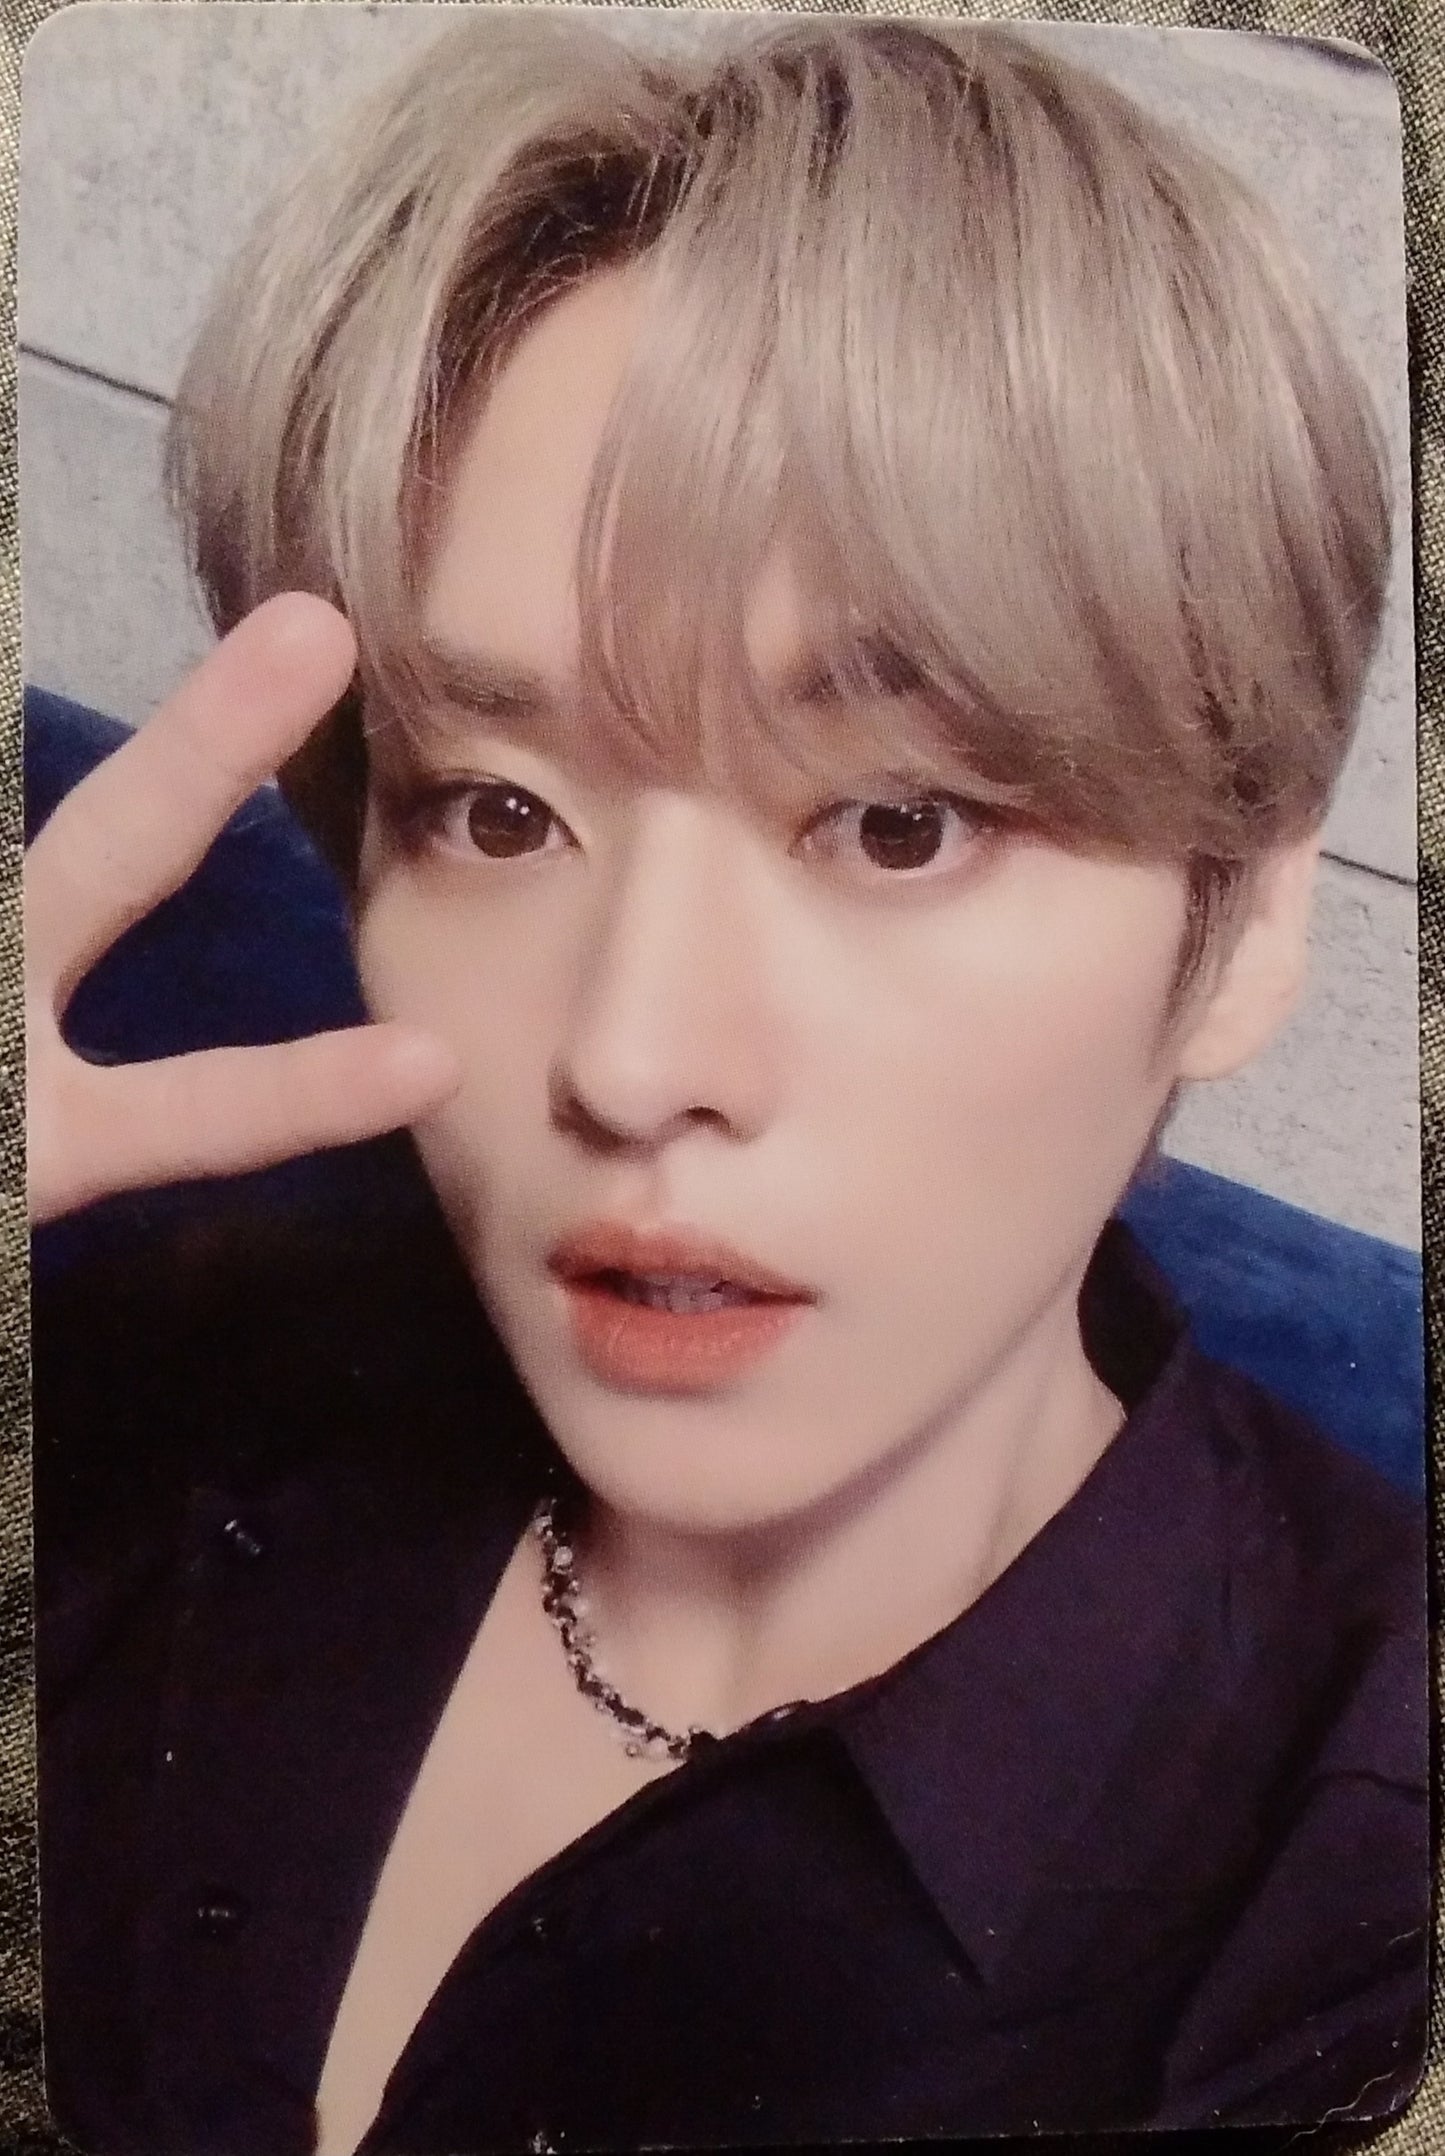 Photocard  STRAYKIDS  Time out  mixtape  Lee know